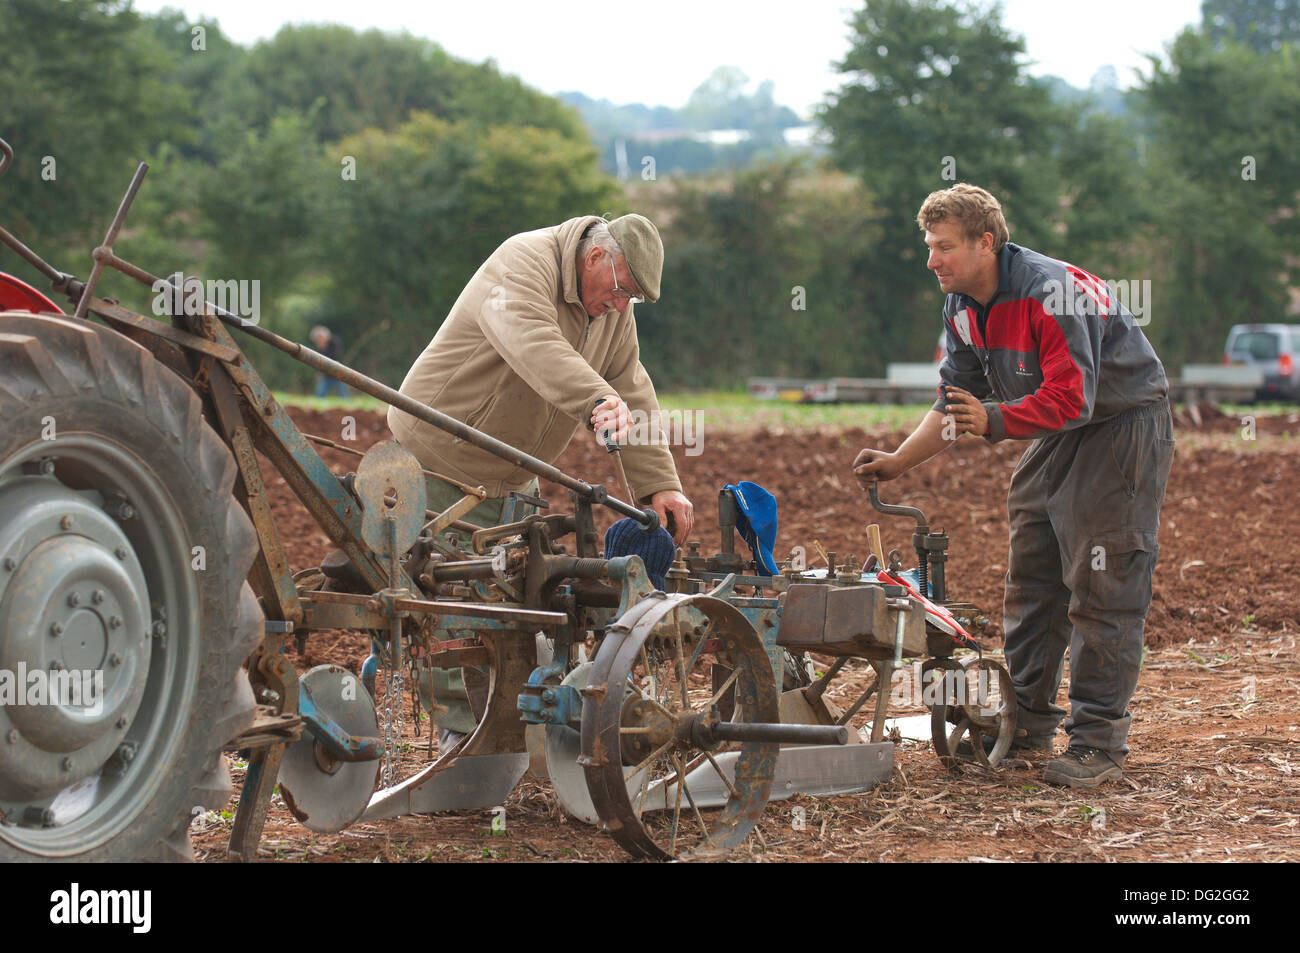 Llanwarne, Herefordshire, UK. 12th October 2013. Contestants take part in the Class 5 Oat Seed Furrow Ploughing event. More than 230 top British ploughmen compete in the 2013 British National Ploughing Championships which have returned to Herefordshire for the first time in 27 years. The top ploughmen of  each class (reversible and conventional) will represent Britain at the World Ploughing Championships to be held in France in 2014. Photo credit: Graham M. Lawrence/Alamy Live News. Stock Photo